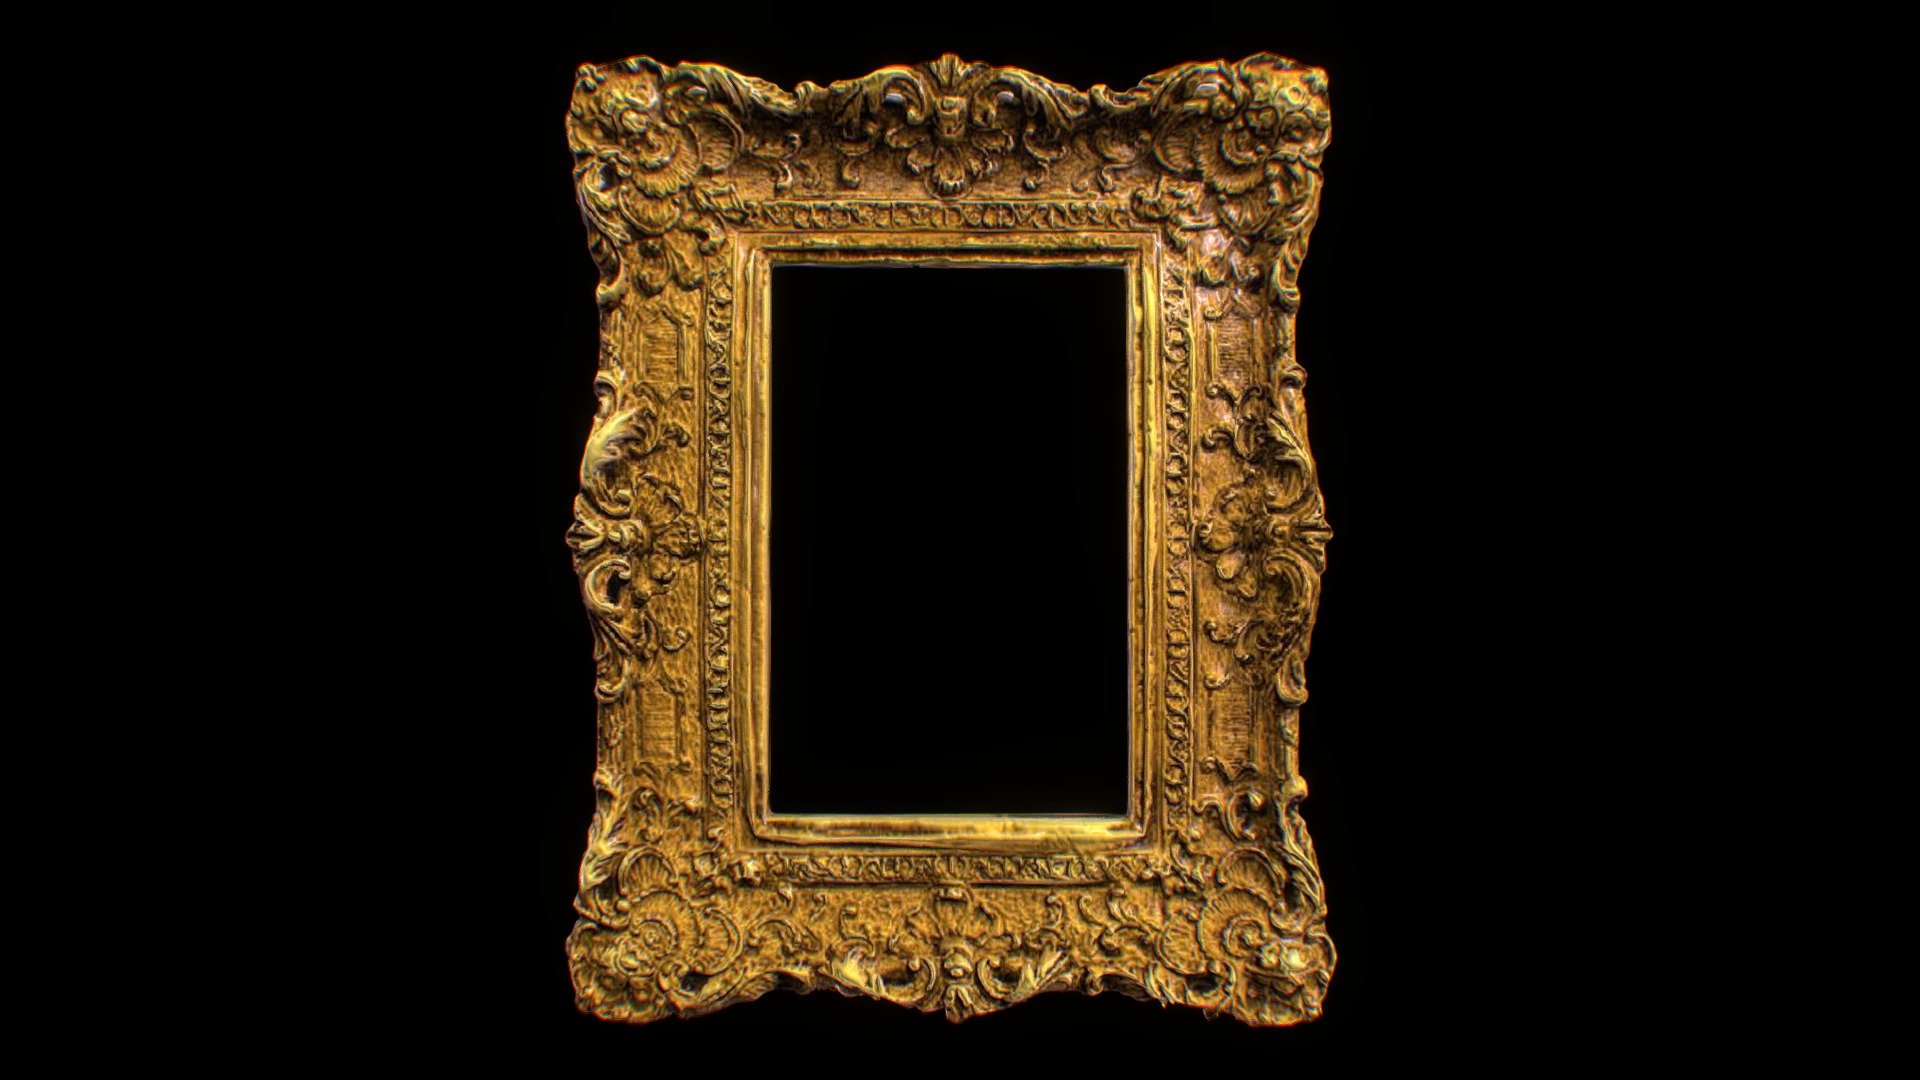 Reconstruction of Antique Classic Style Art Frame

Made to encase Artworks and Mirrors

ARTBASE - Antique Classic Art Frame - Buy Royalty Free 3D model by 𝔼ℕ𝔼𝔸 𝕃𝔼 𝔽𝕆ℕ𝕊 (@enealefons) 3d model